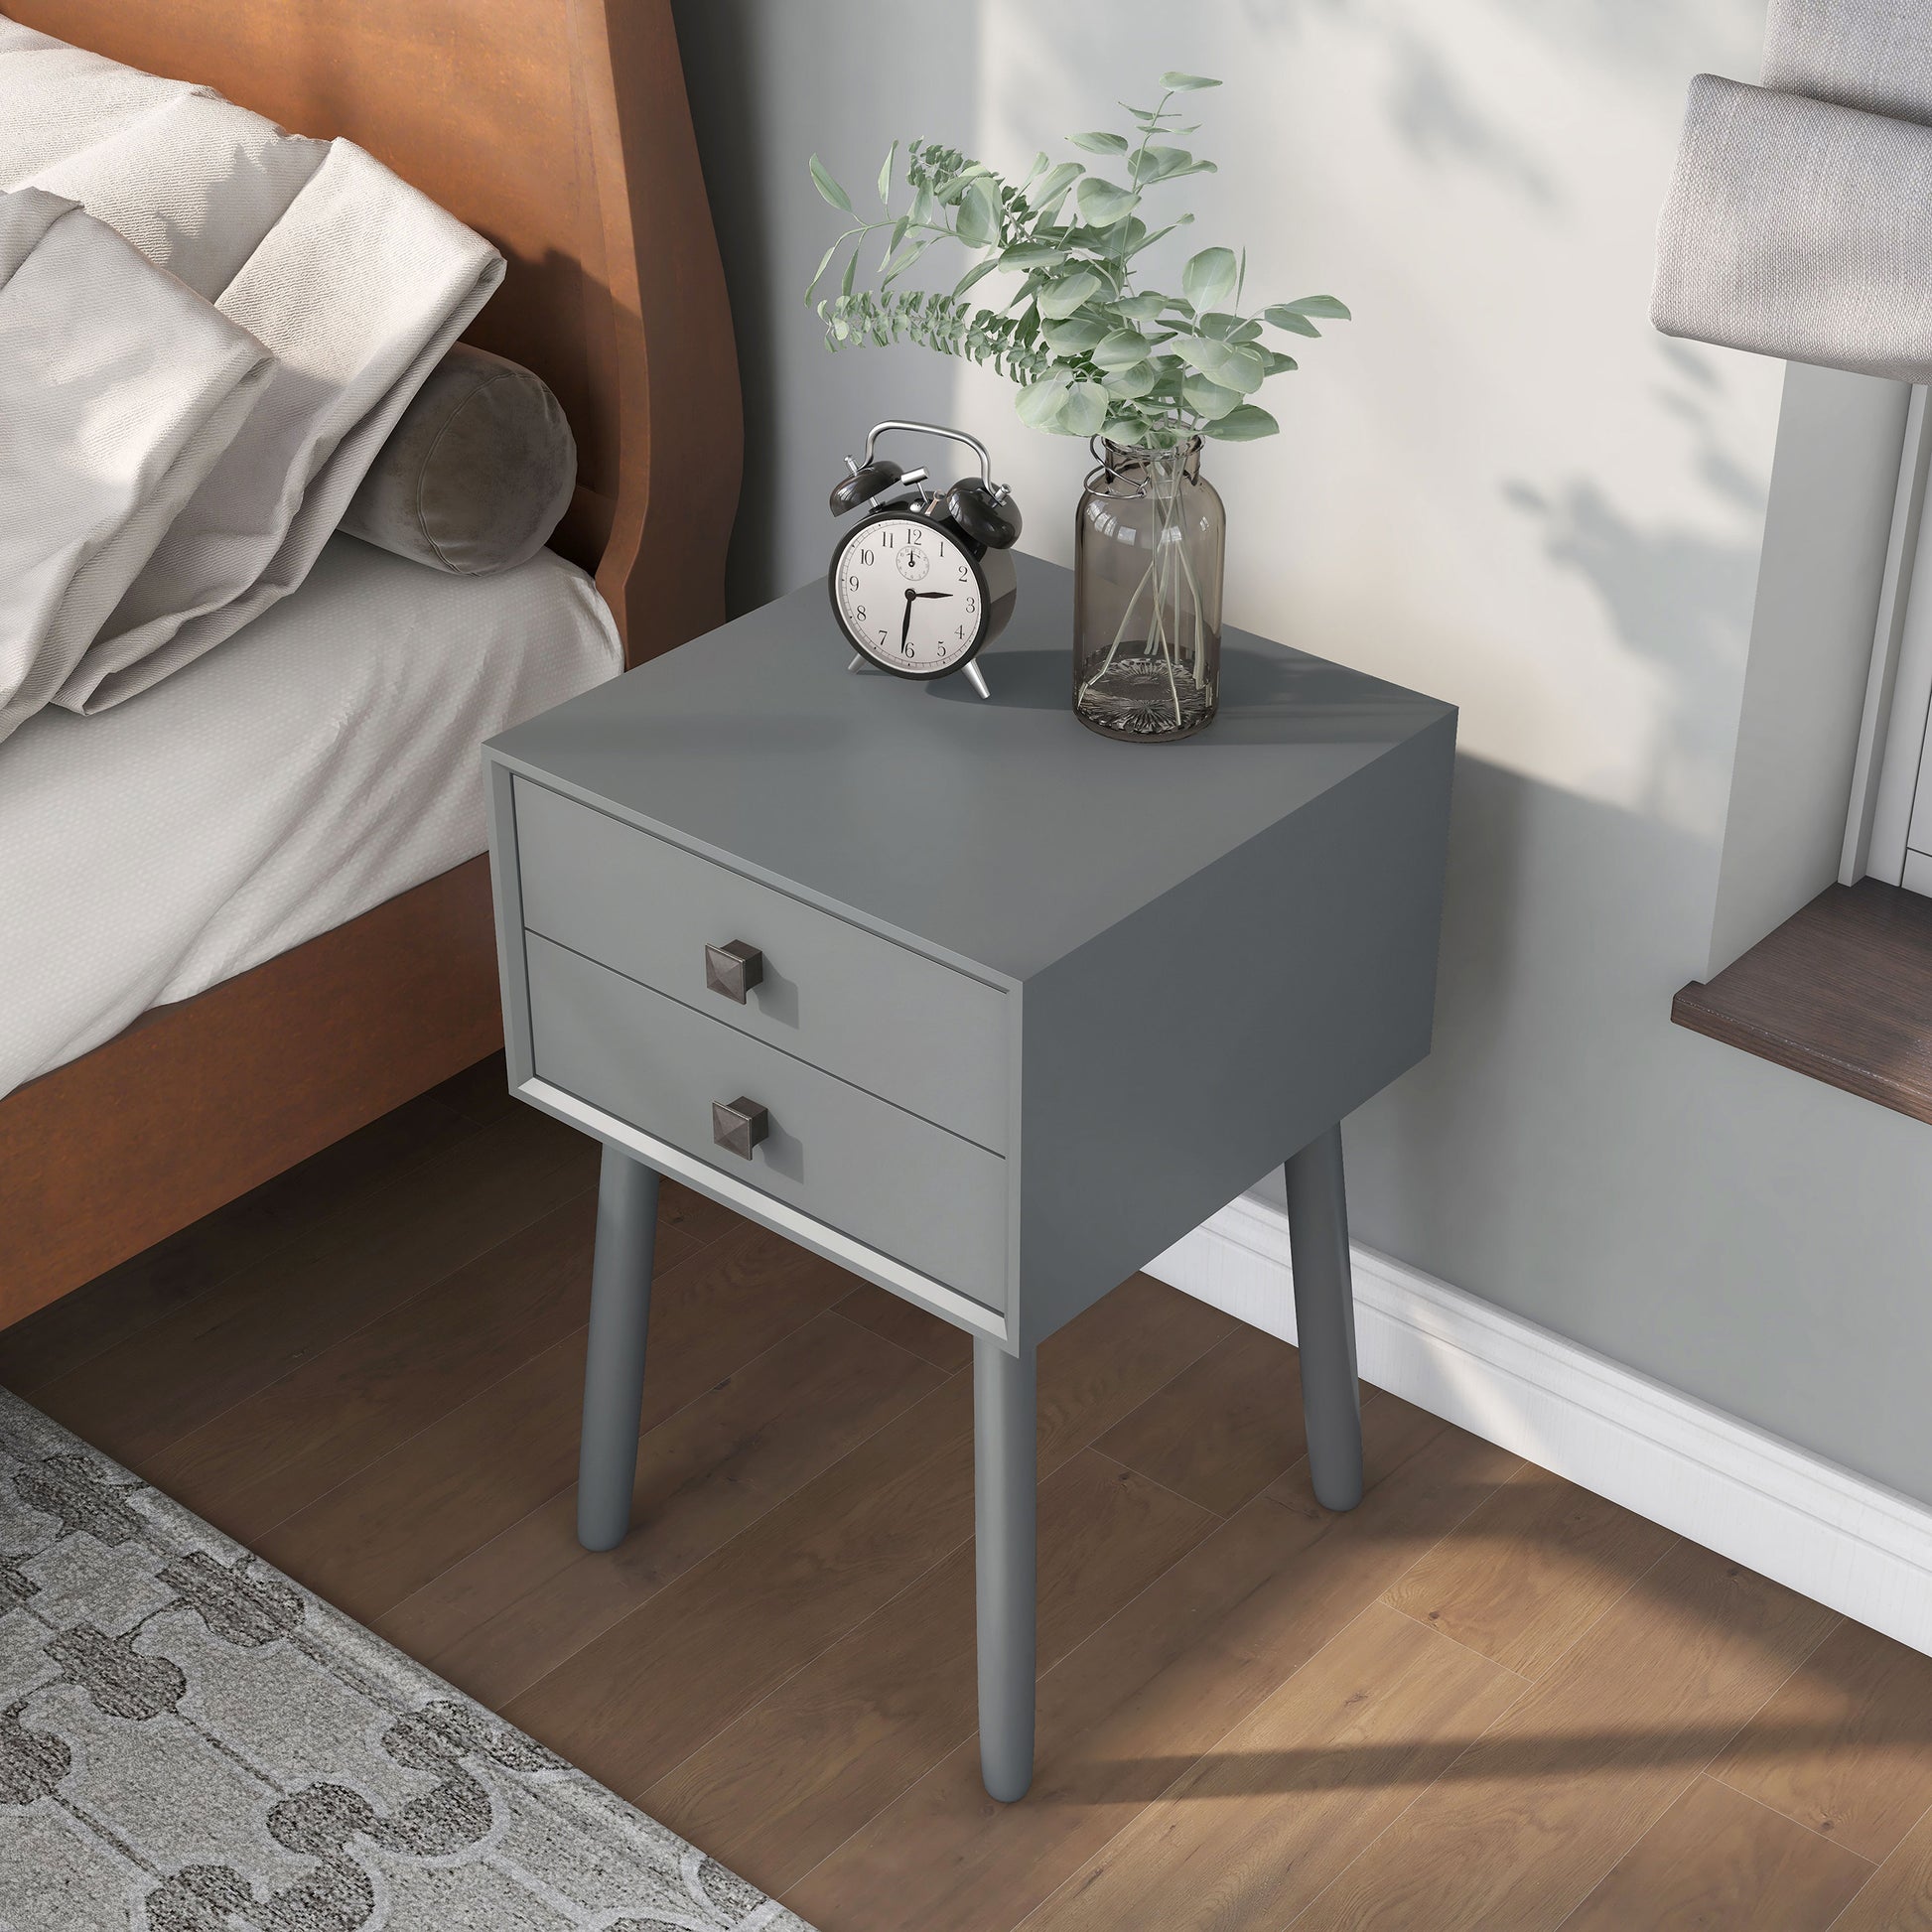 Left angled bird's eye view of a modern gray two-drawer compact nightstand with splayed legs in a bedroom with accessories